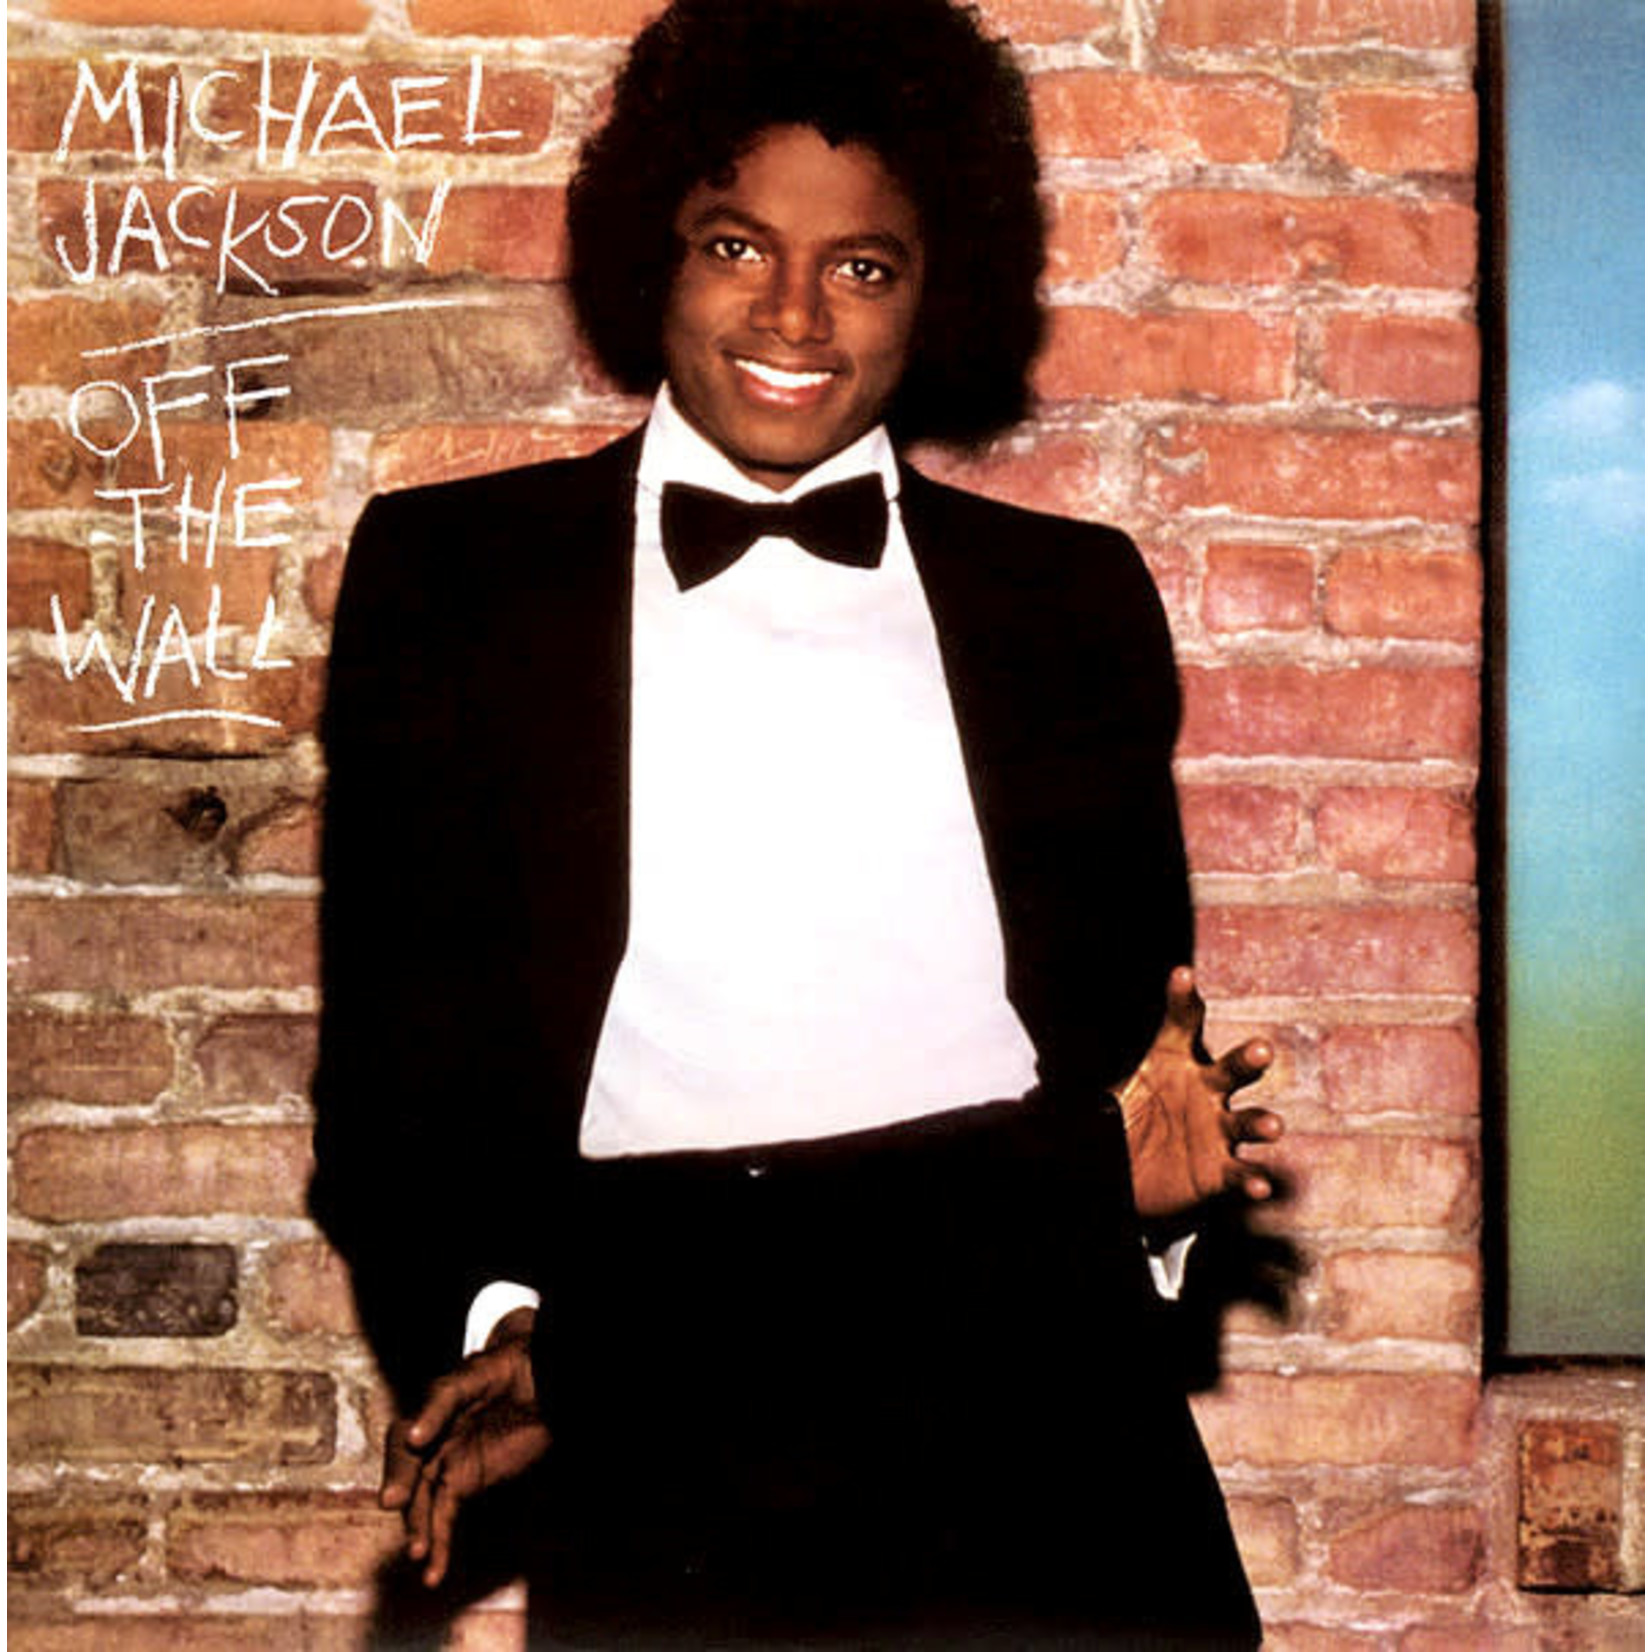 [New] Michael Jackson - Off the Wall